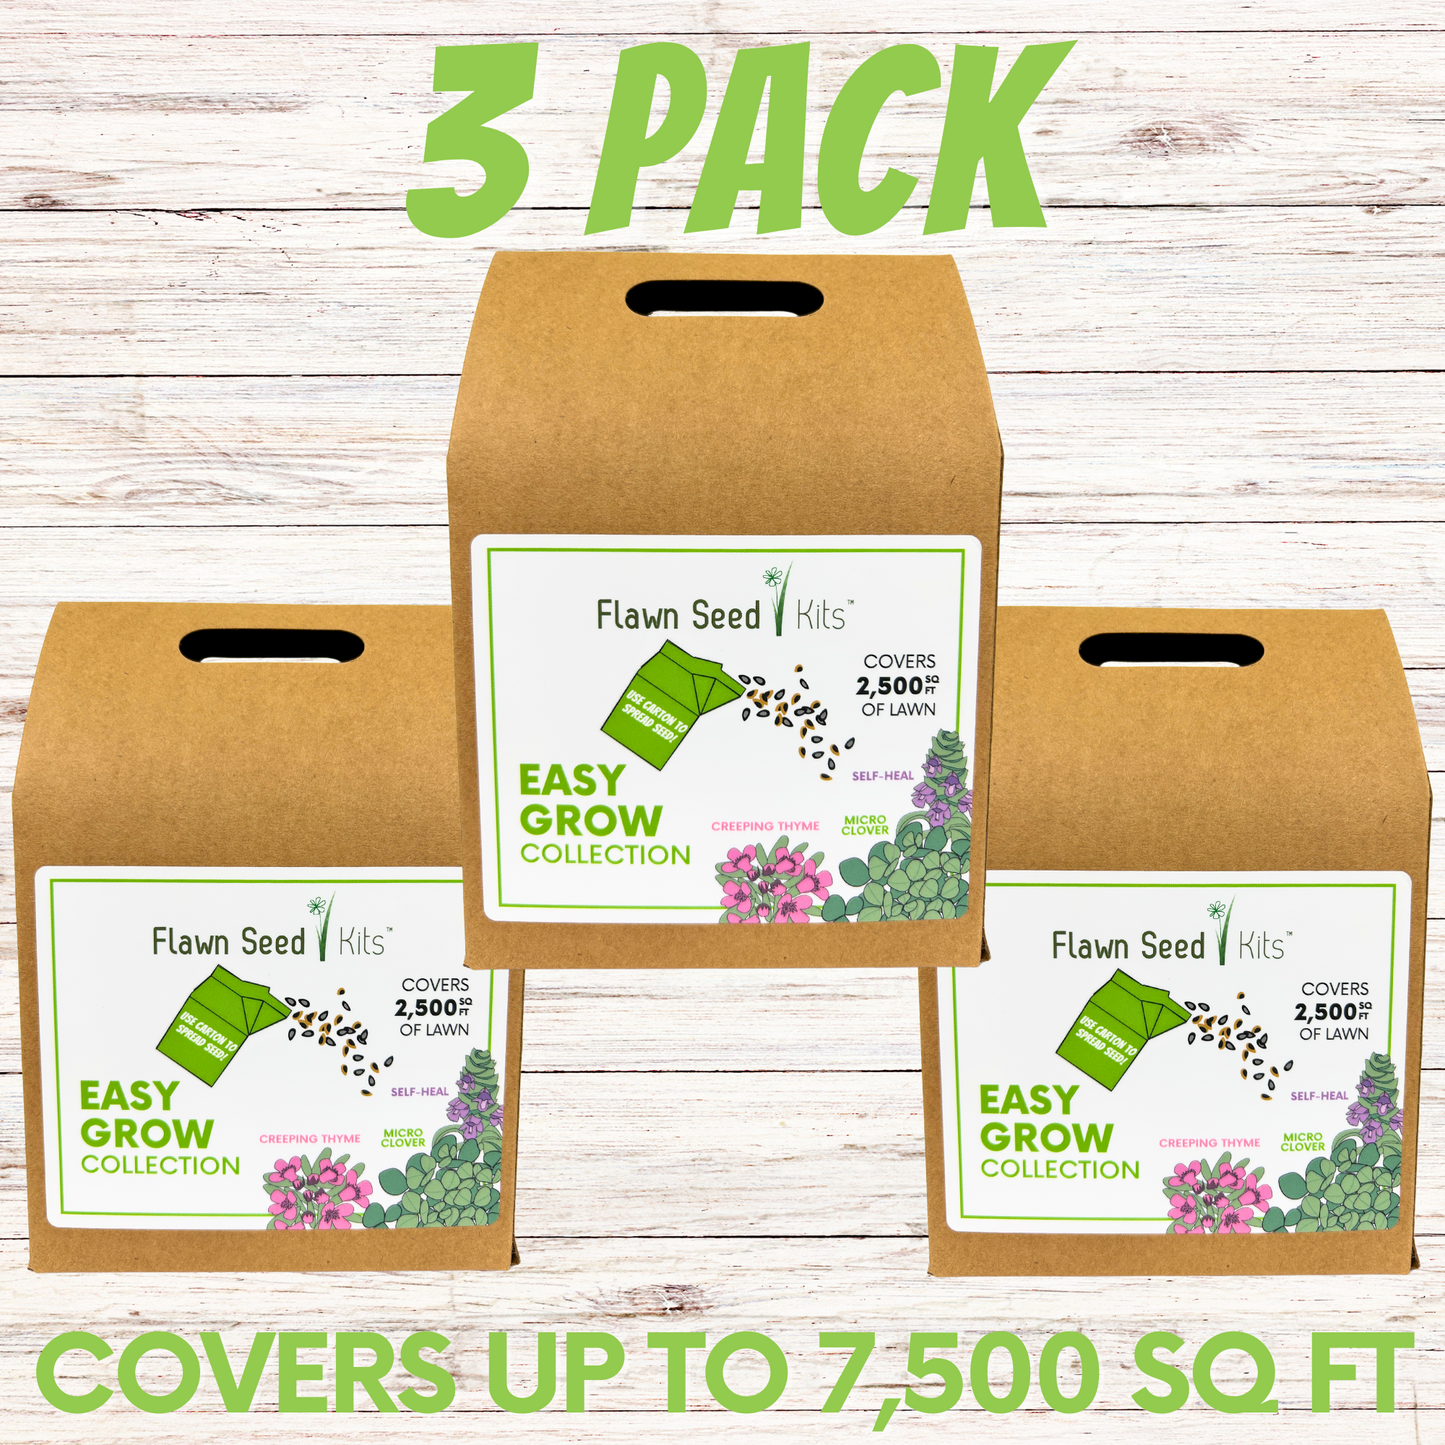 Micro Bee Lawn Flowering Pollinator Seed Kit, Micro Clover, Self-Heal, Creeping Thyme, Easy Spread Container 3 Pack Covers 7,500 square feet